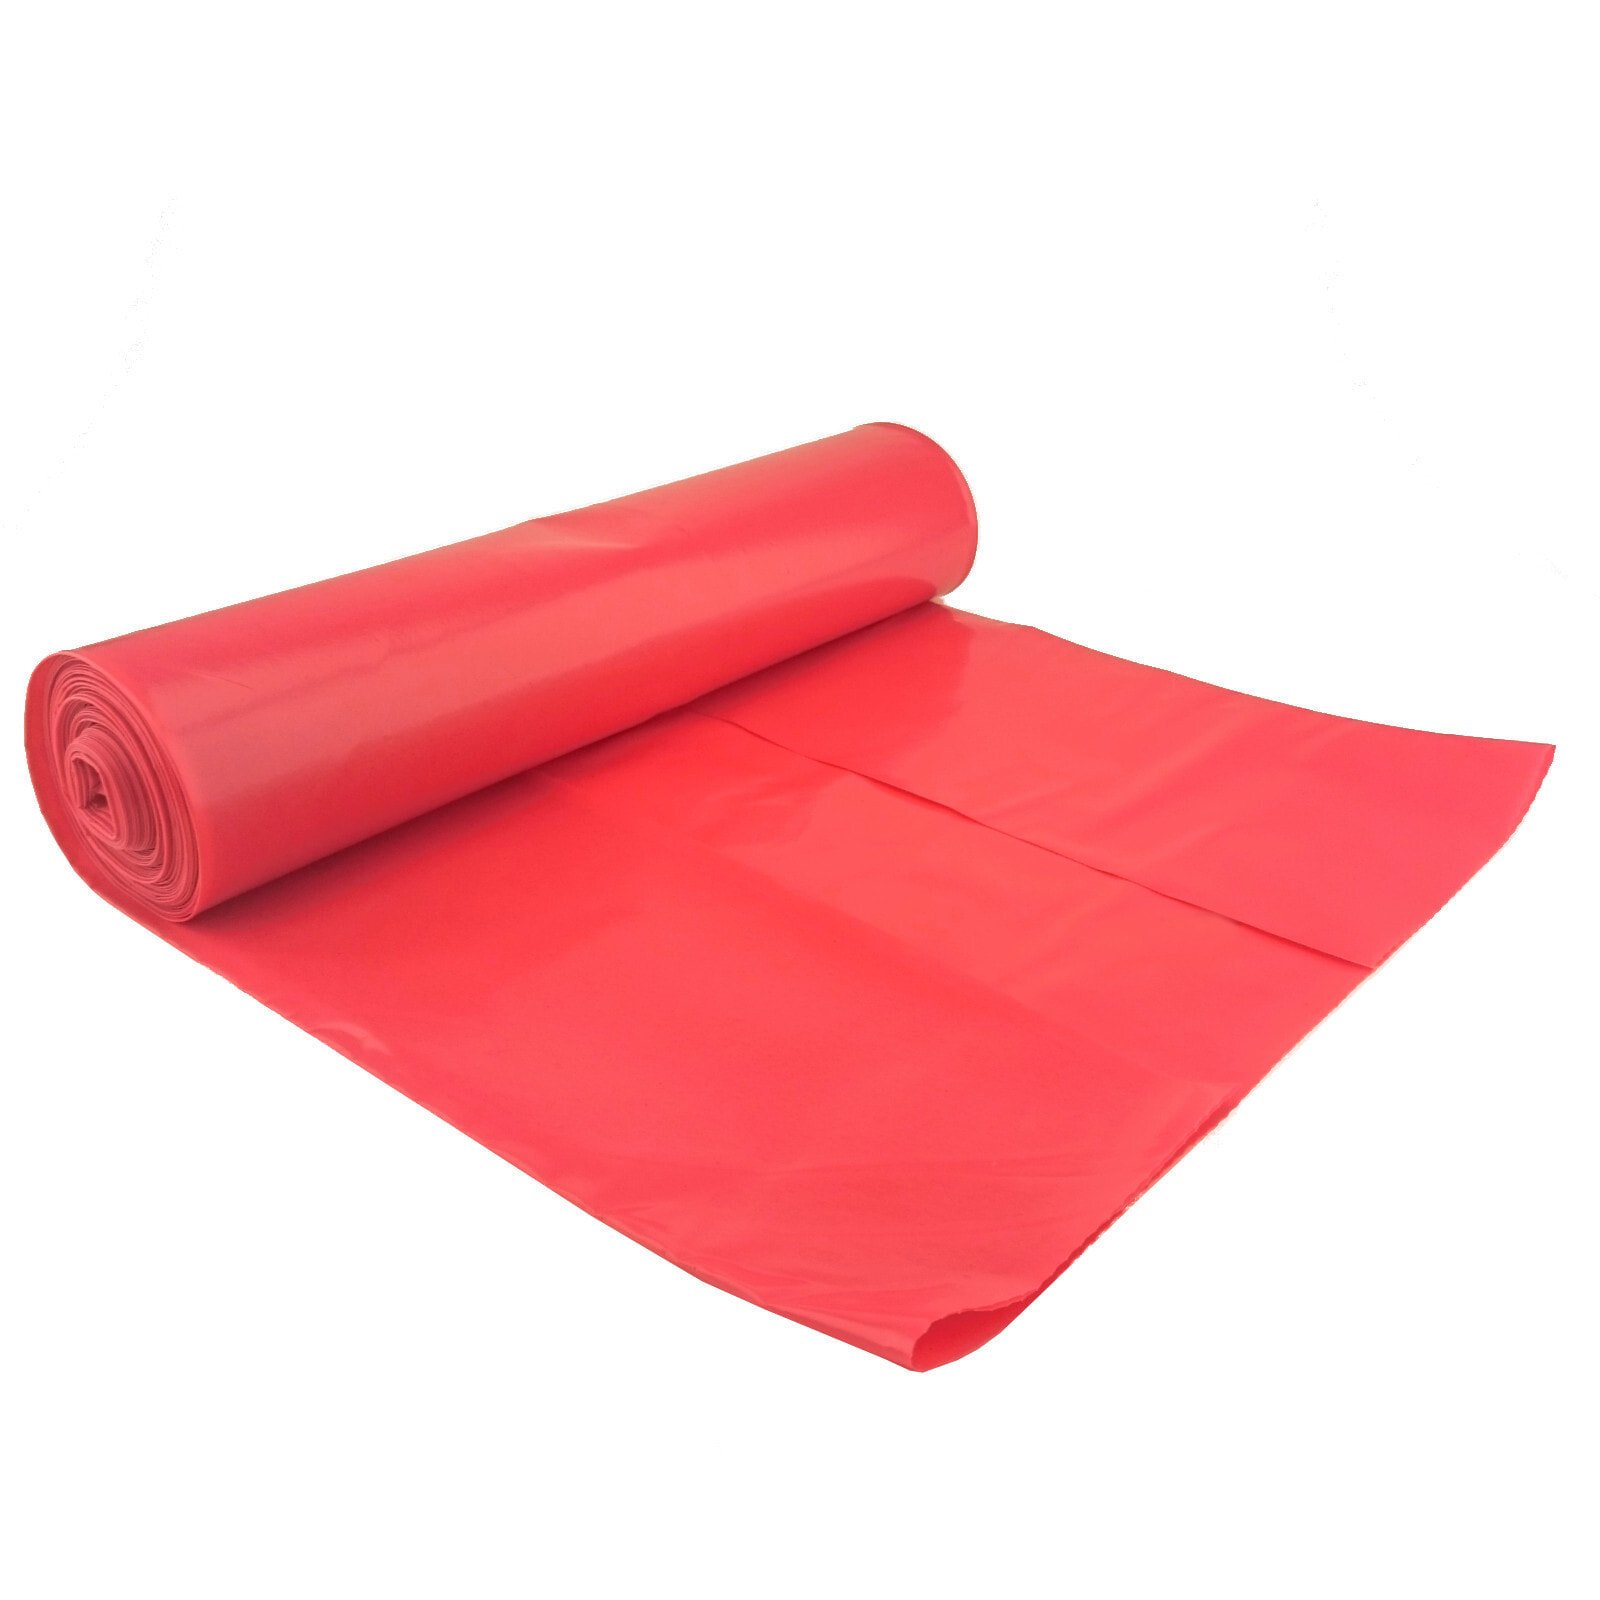 80 micron thick garbage bags. durable roll 5 pcs. - red 240L